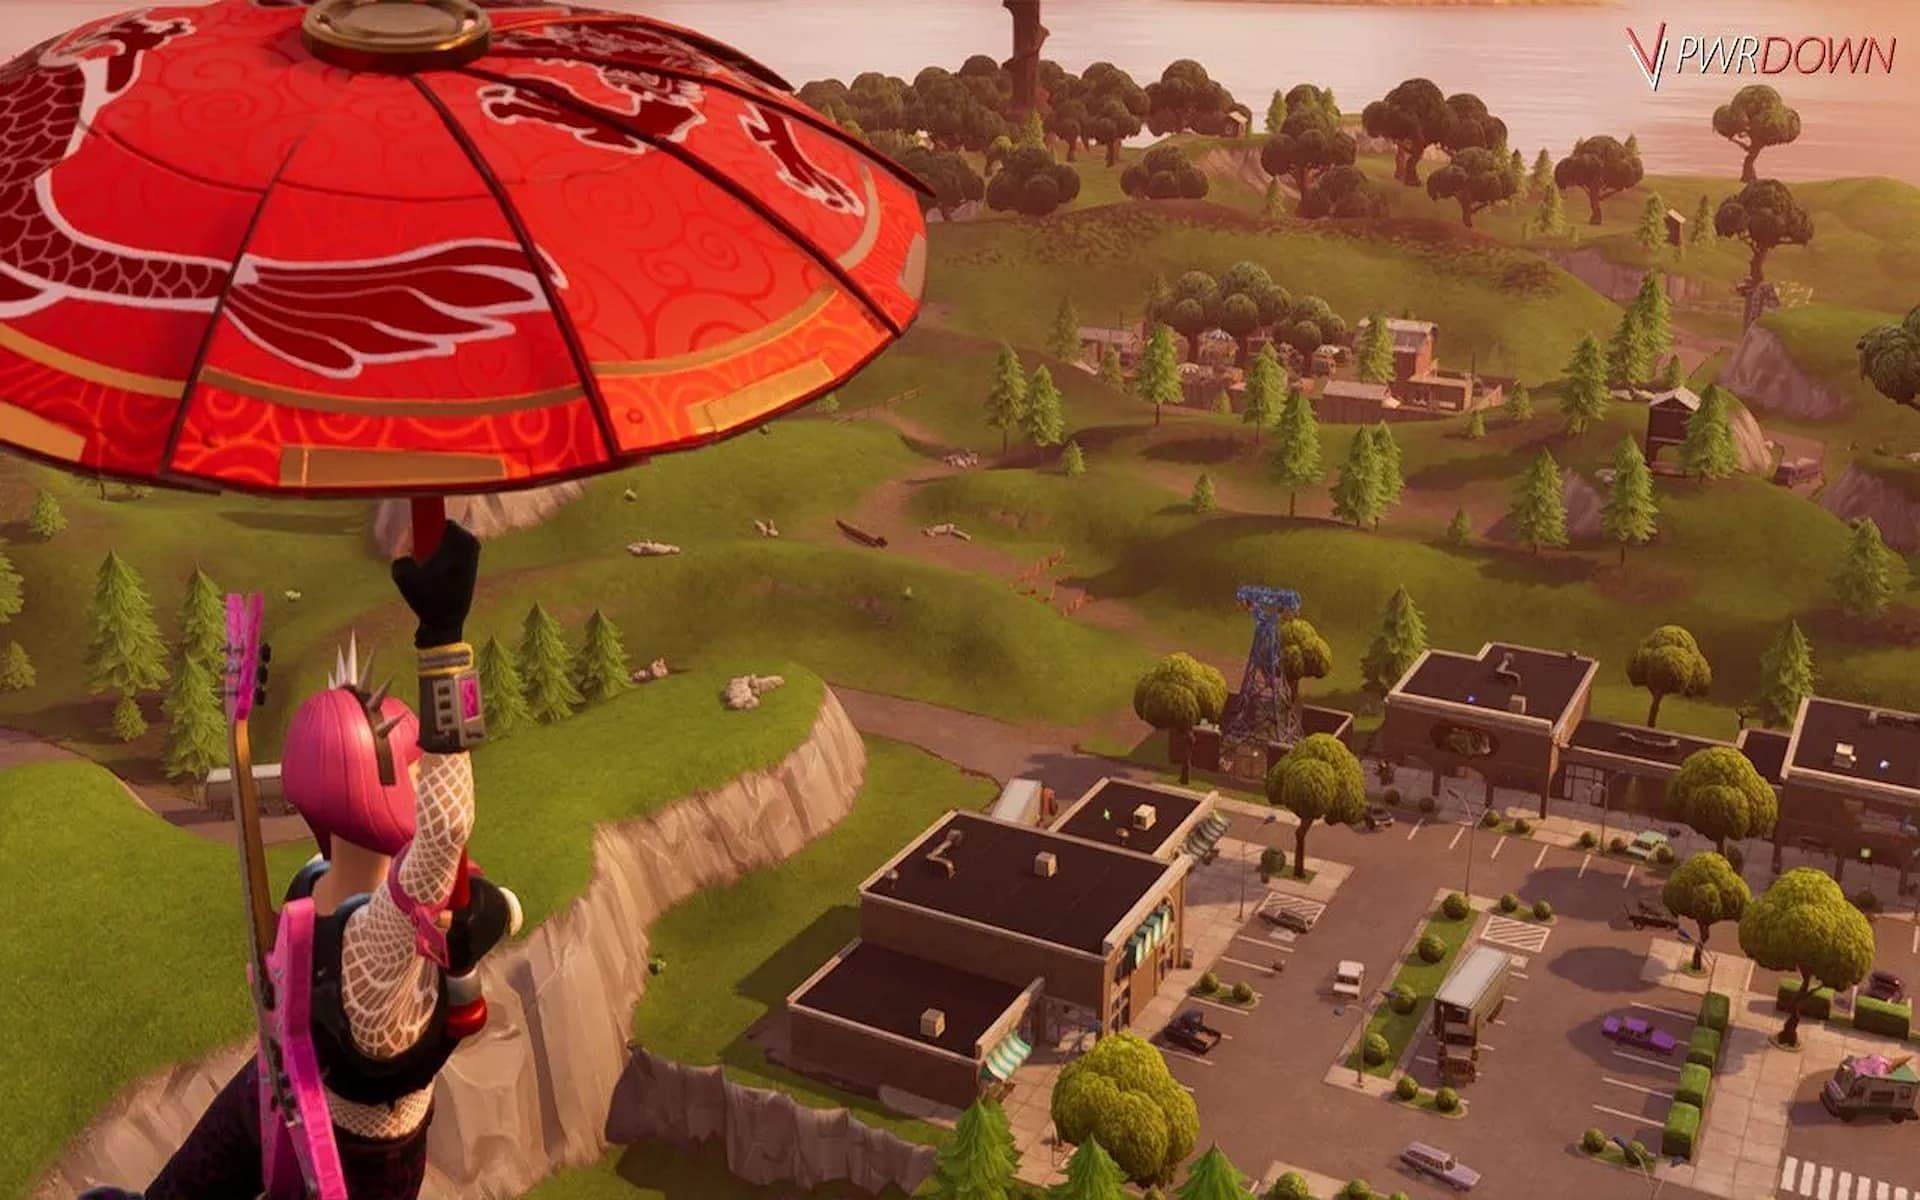 A player gliding down the Fortnite island (Image via Epic Games)